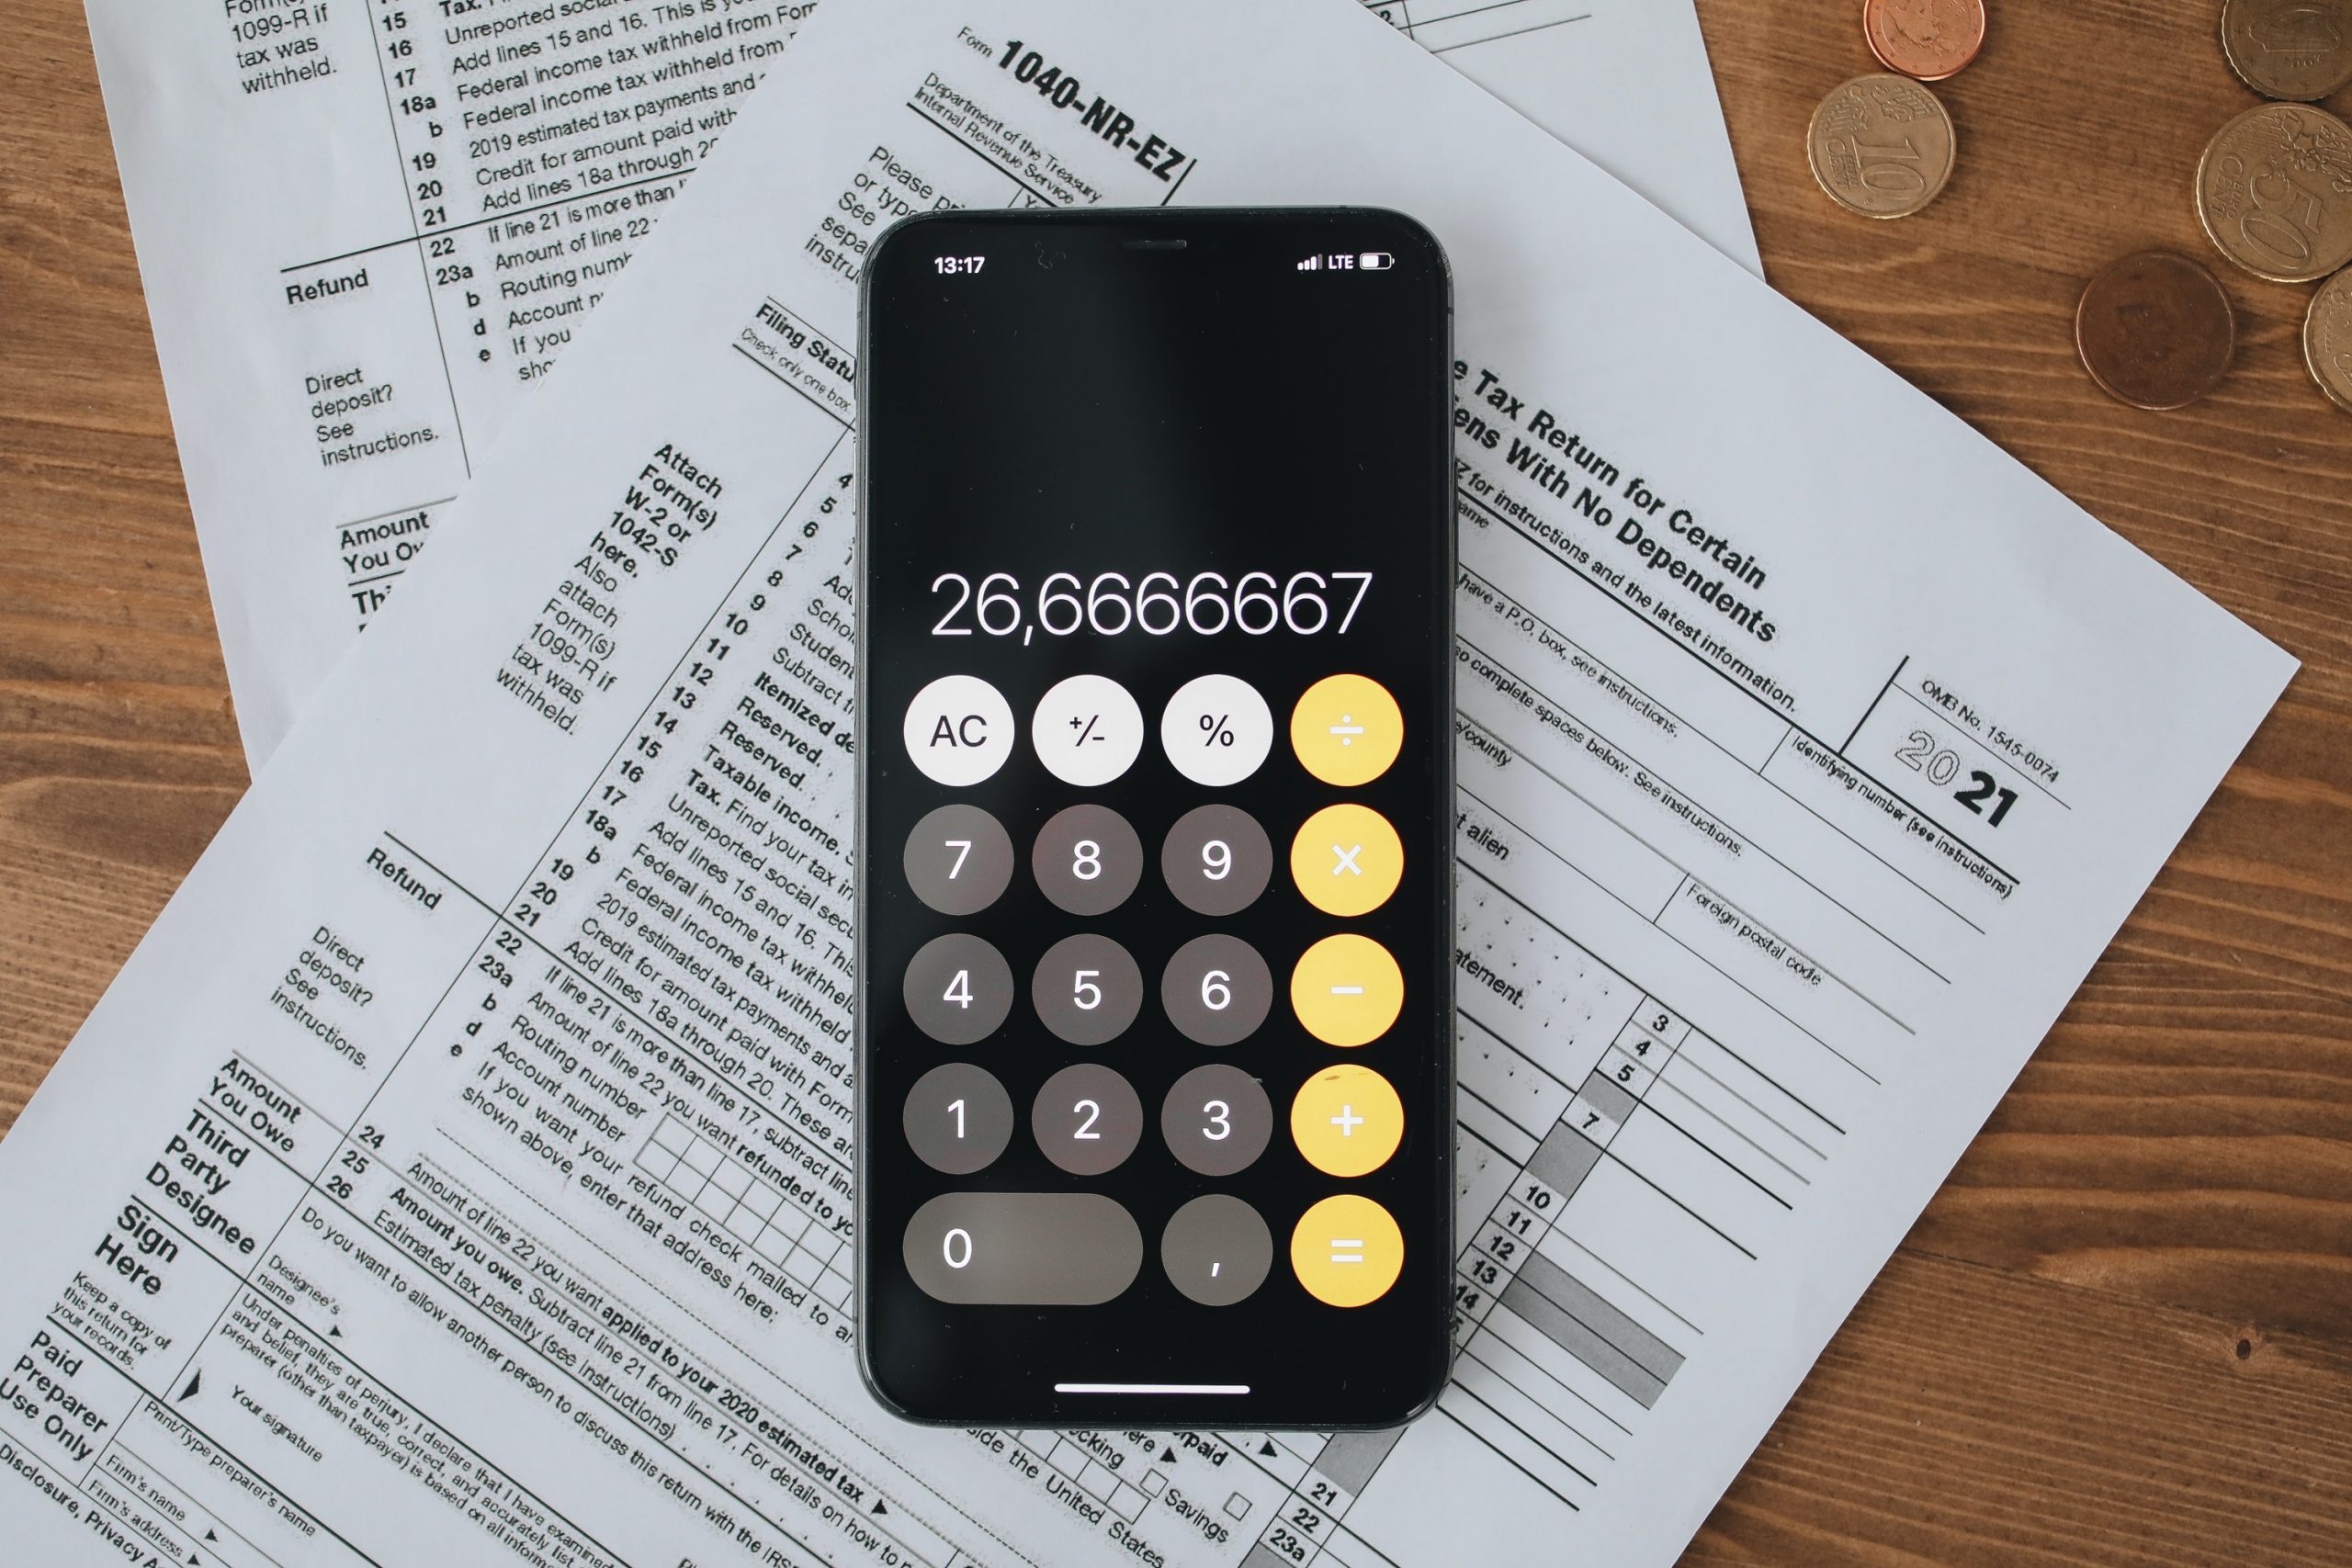 Photo by Polina Tankilevitch: https://www.pexels.com/photo/tax-forms-with-calculator-on-wooden-surface-6927334/